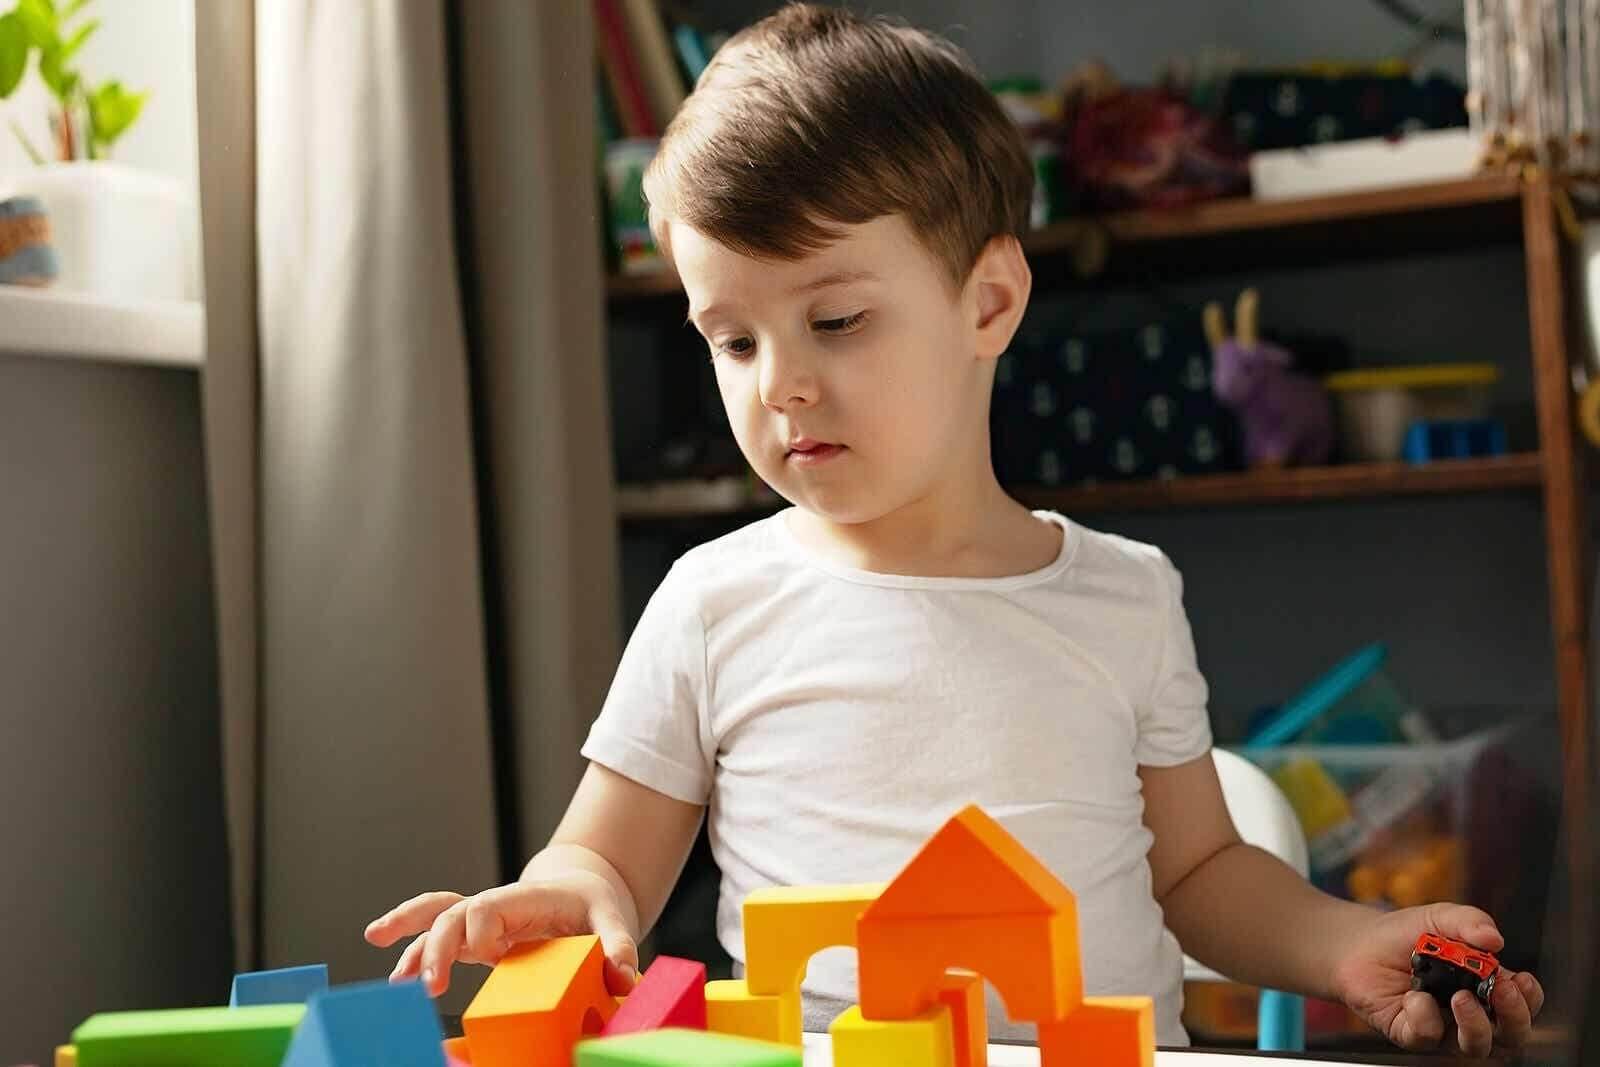 Child playing with building blocks, but not wanting to pick them up.